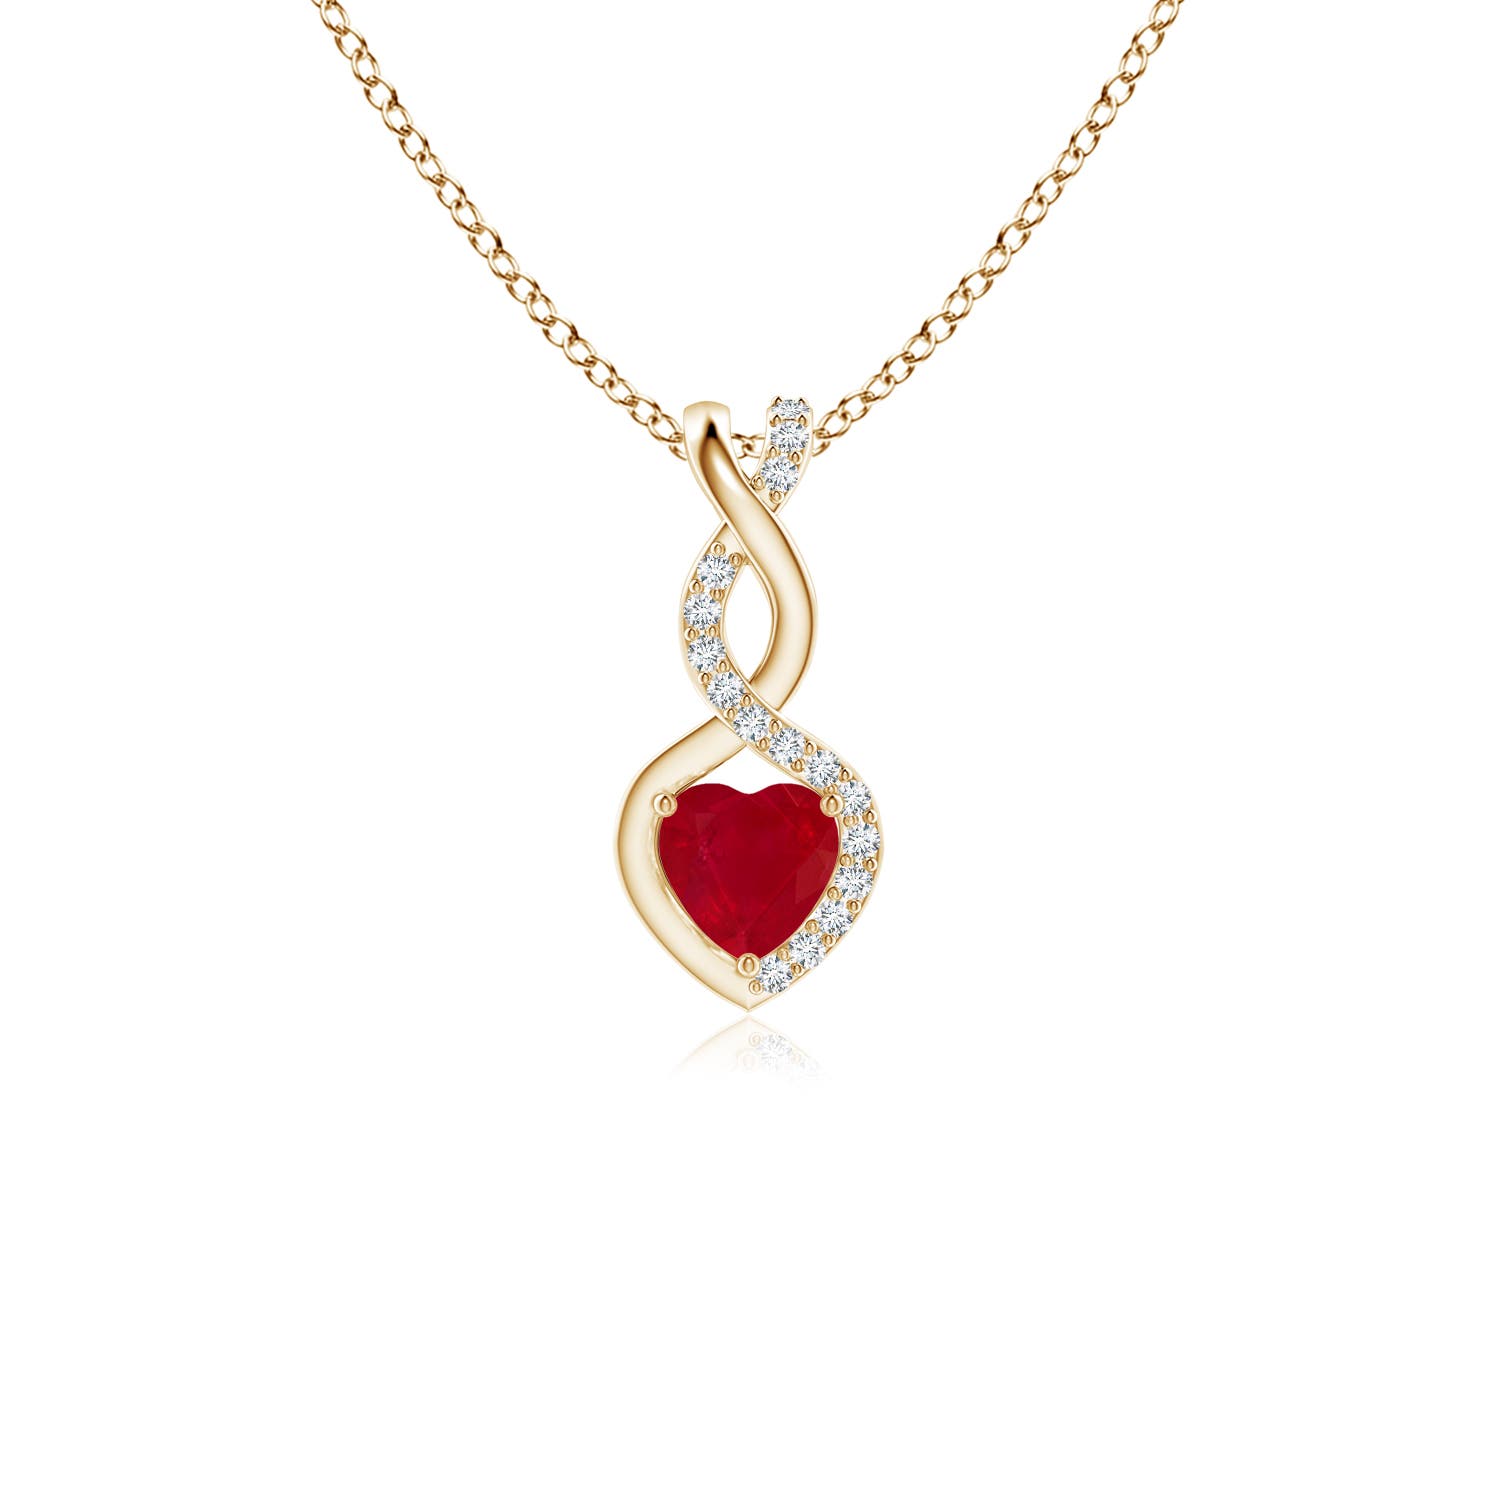 AA - Ruby / 0.35 CT / 14 KT Yellow Gold